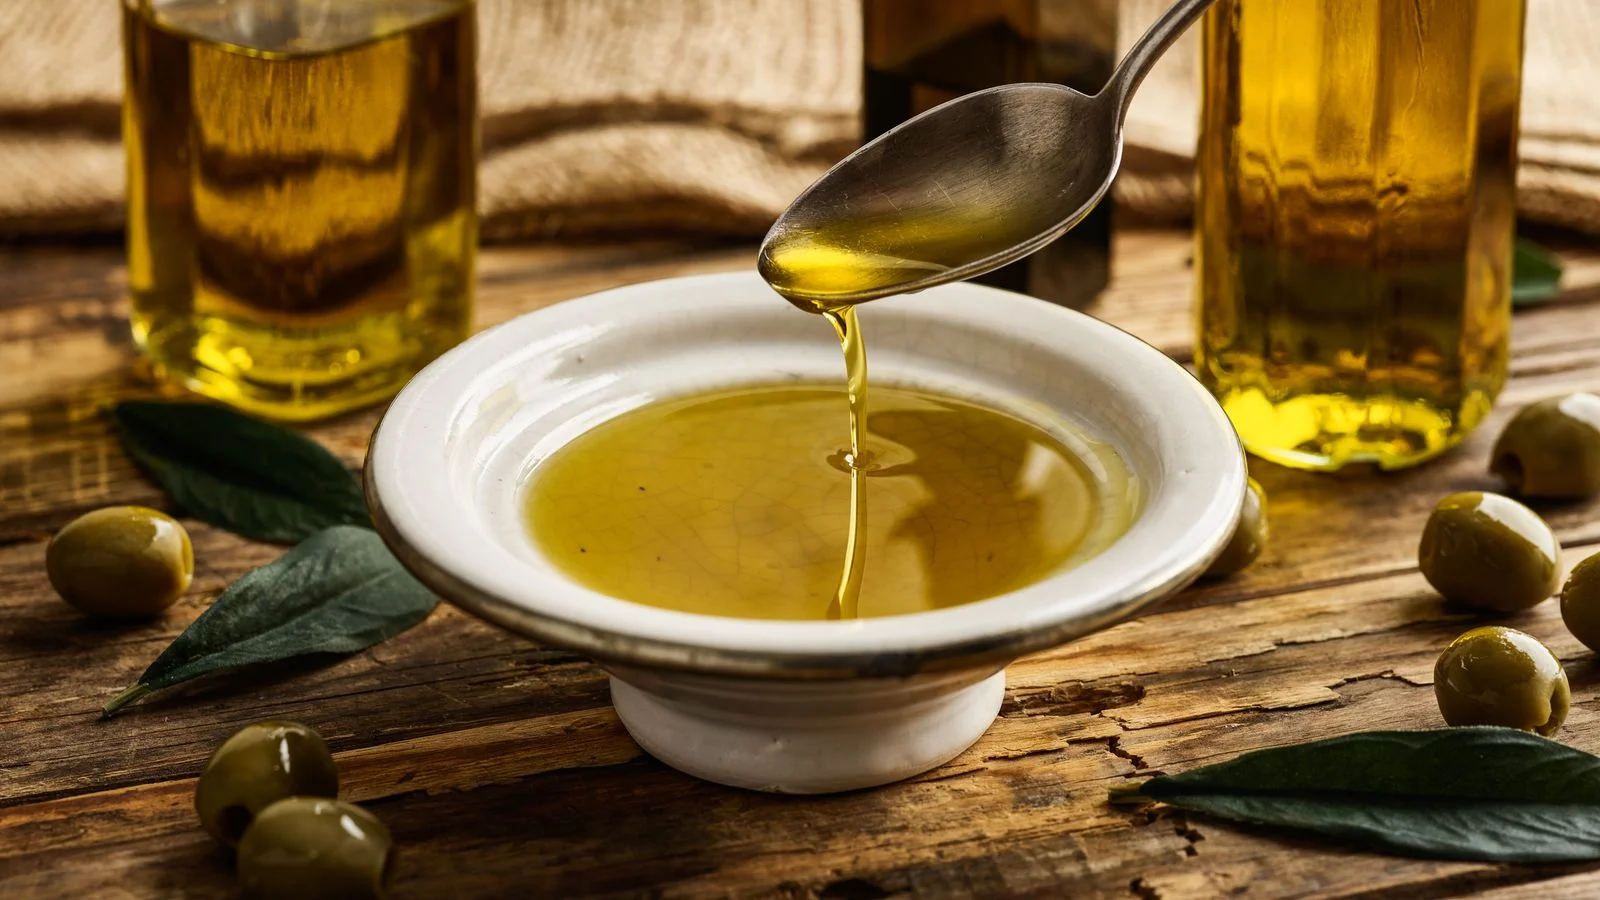 How is olive oil used? What Are The Pros And Cons Of Olive Oil?